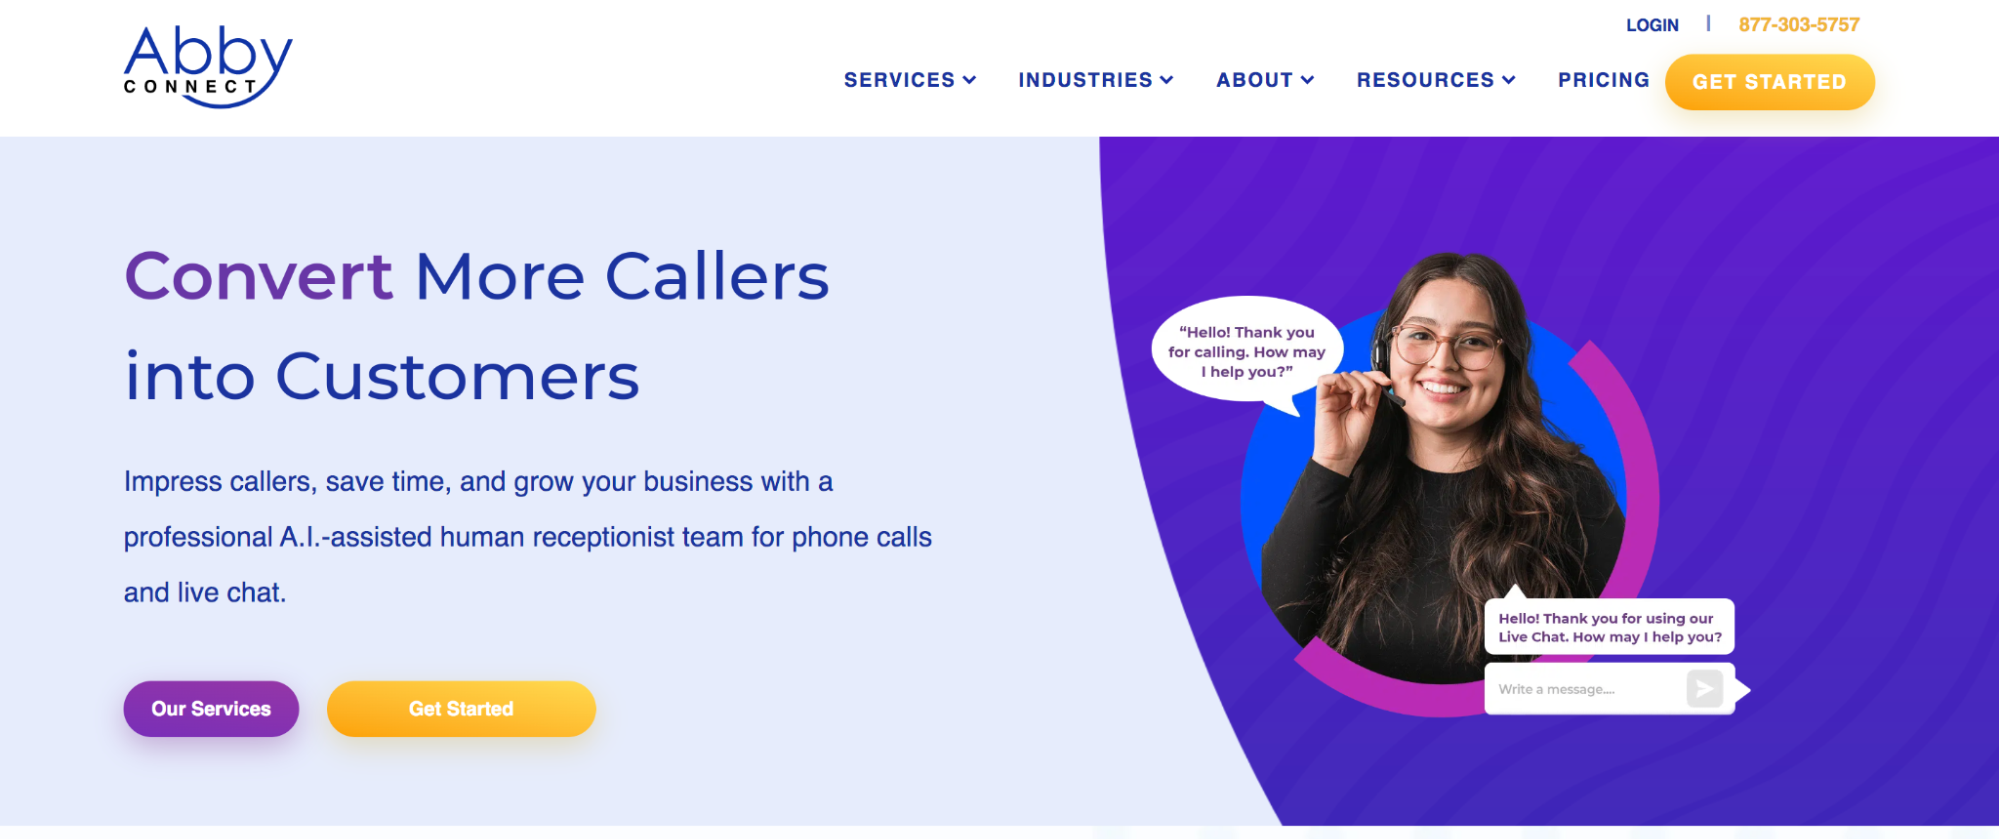 Screenshot of the Abby Connect homepage, one of the best virtual receptionist services for small business.